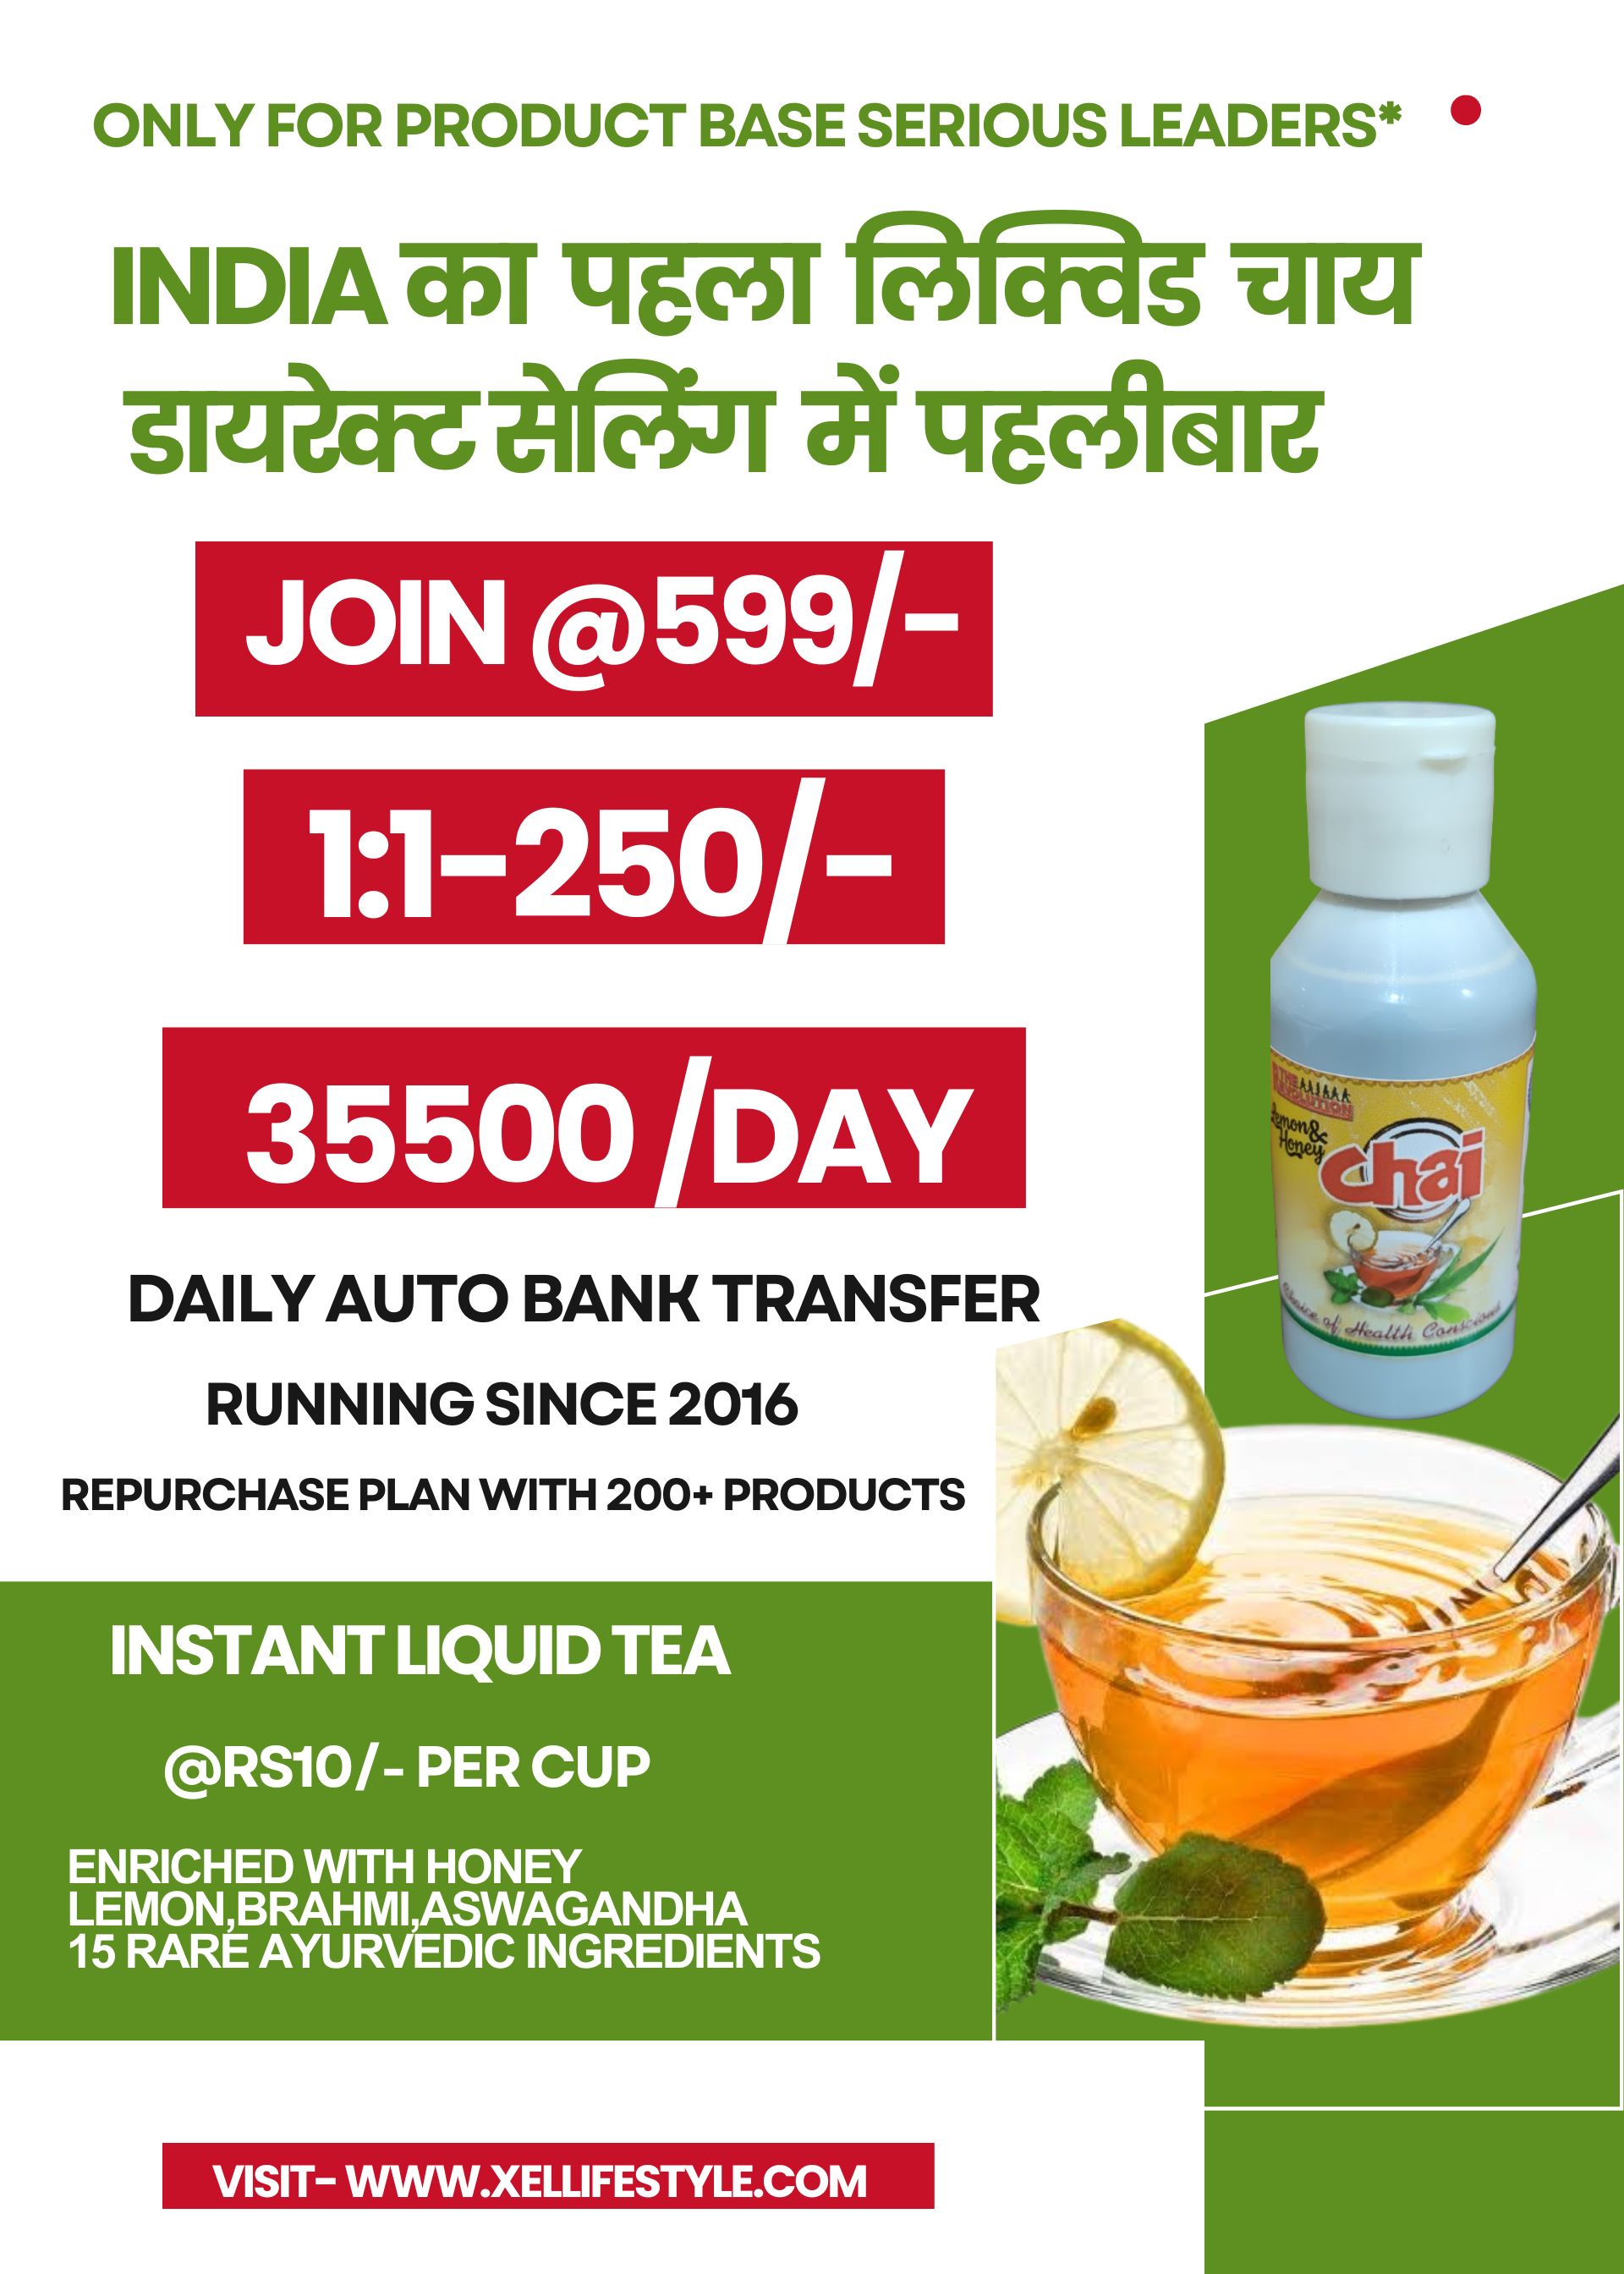 Join @599 1:1-250,Earn 36000/Day